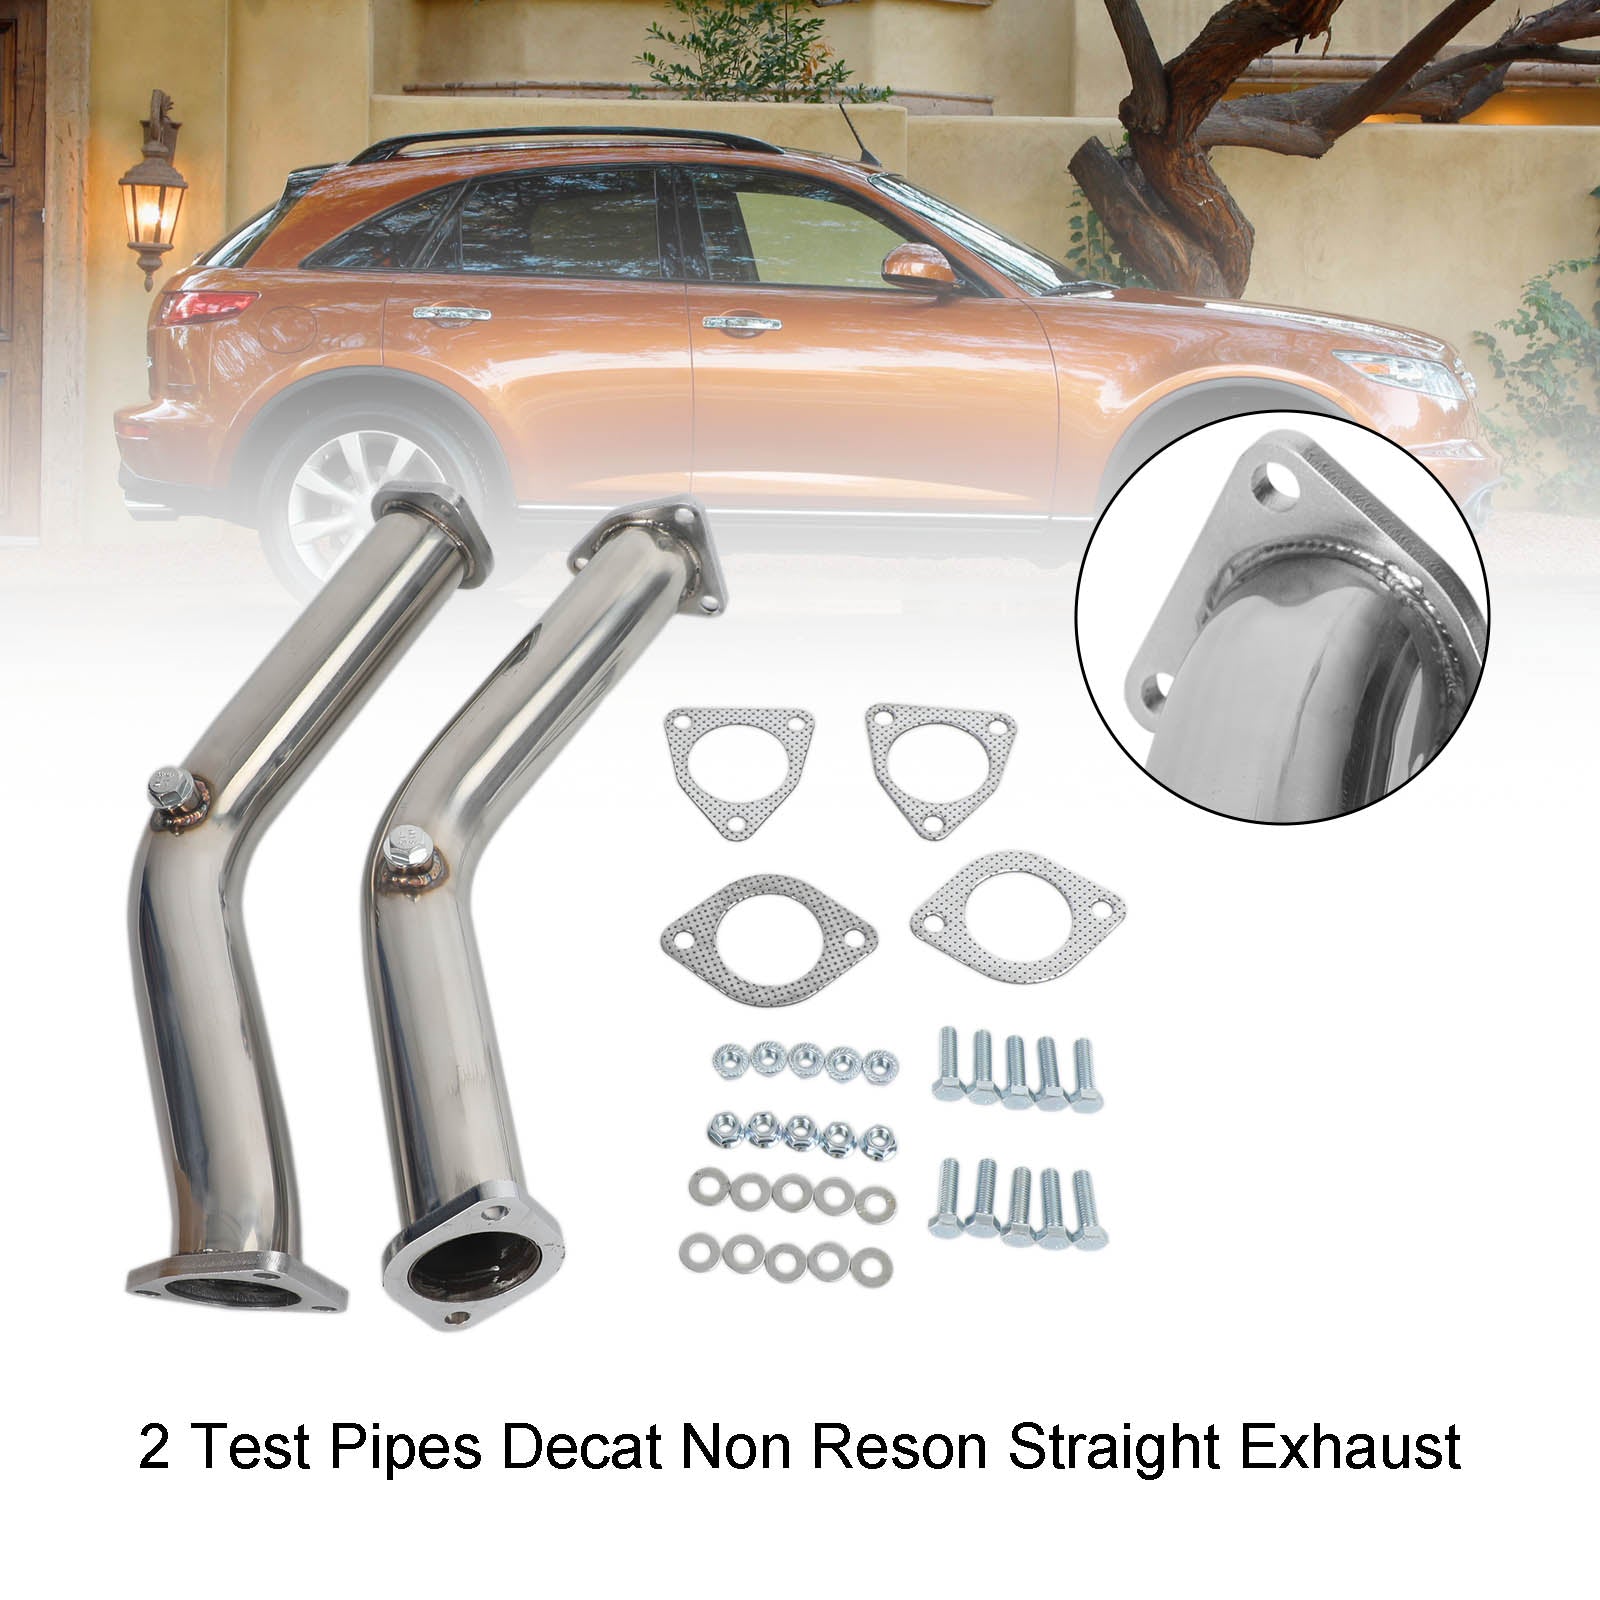 Infiniti 2003-2006 G35 FX35 Nissan 350Z 2 Test Pipes Decat Non Reson Straight Exhaust - 0